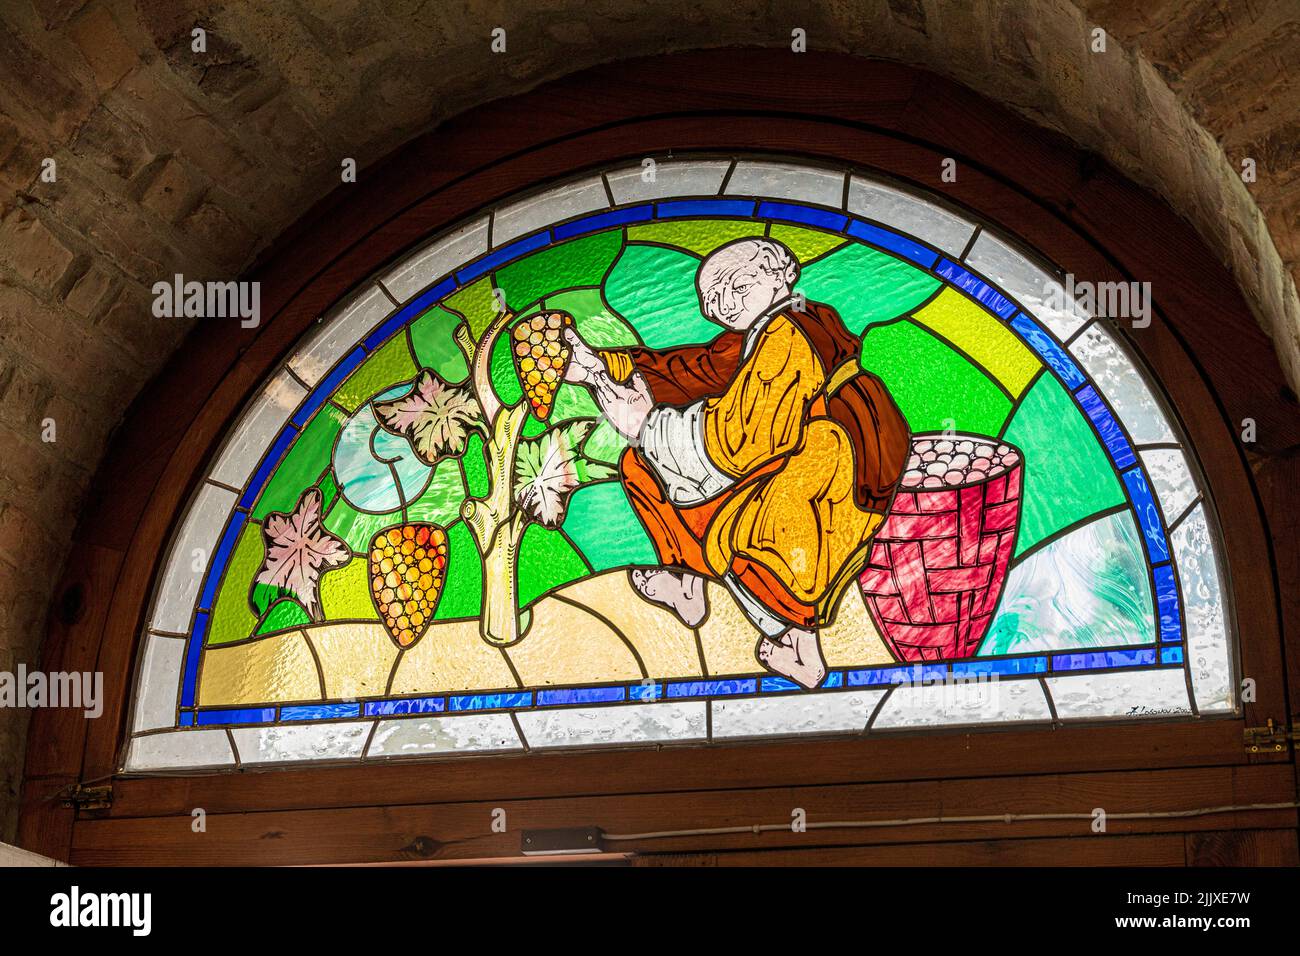 A stained glass window of a monk harvesting grapes in a shop in the Old Town of Tallinn the capital city of Estonia Stock Photo